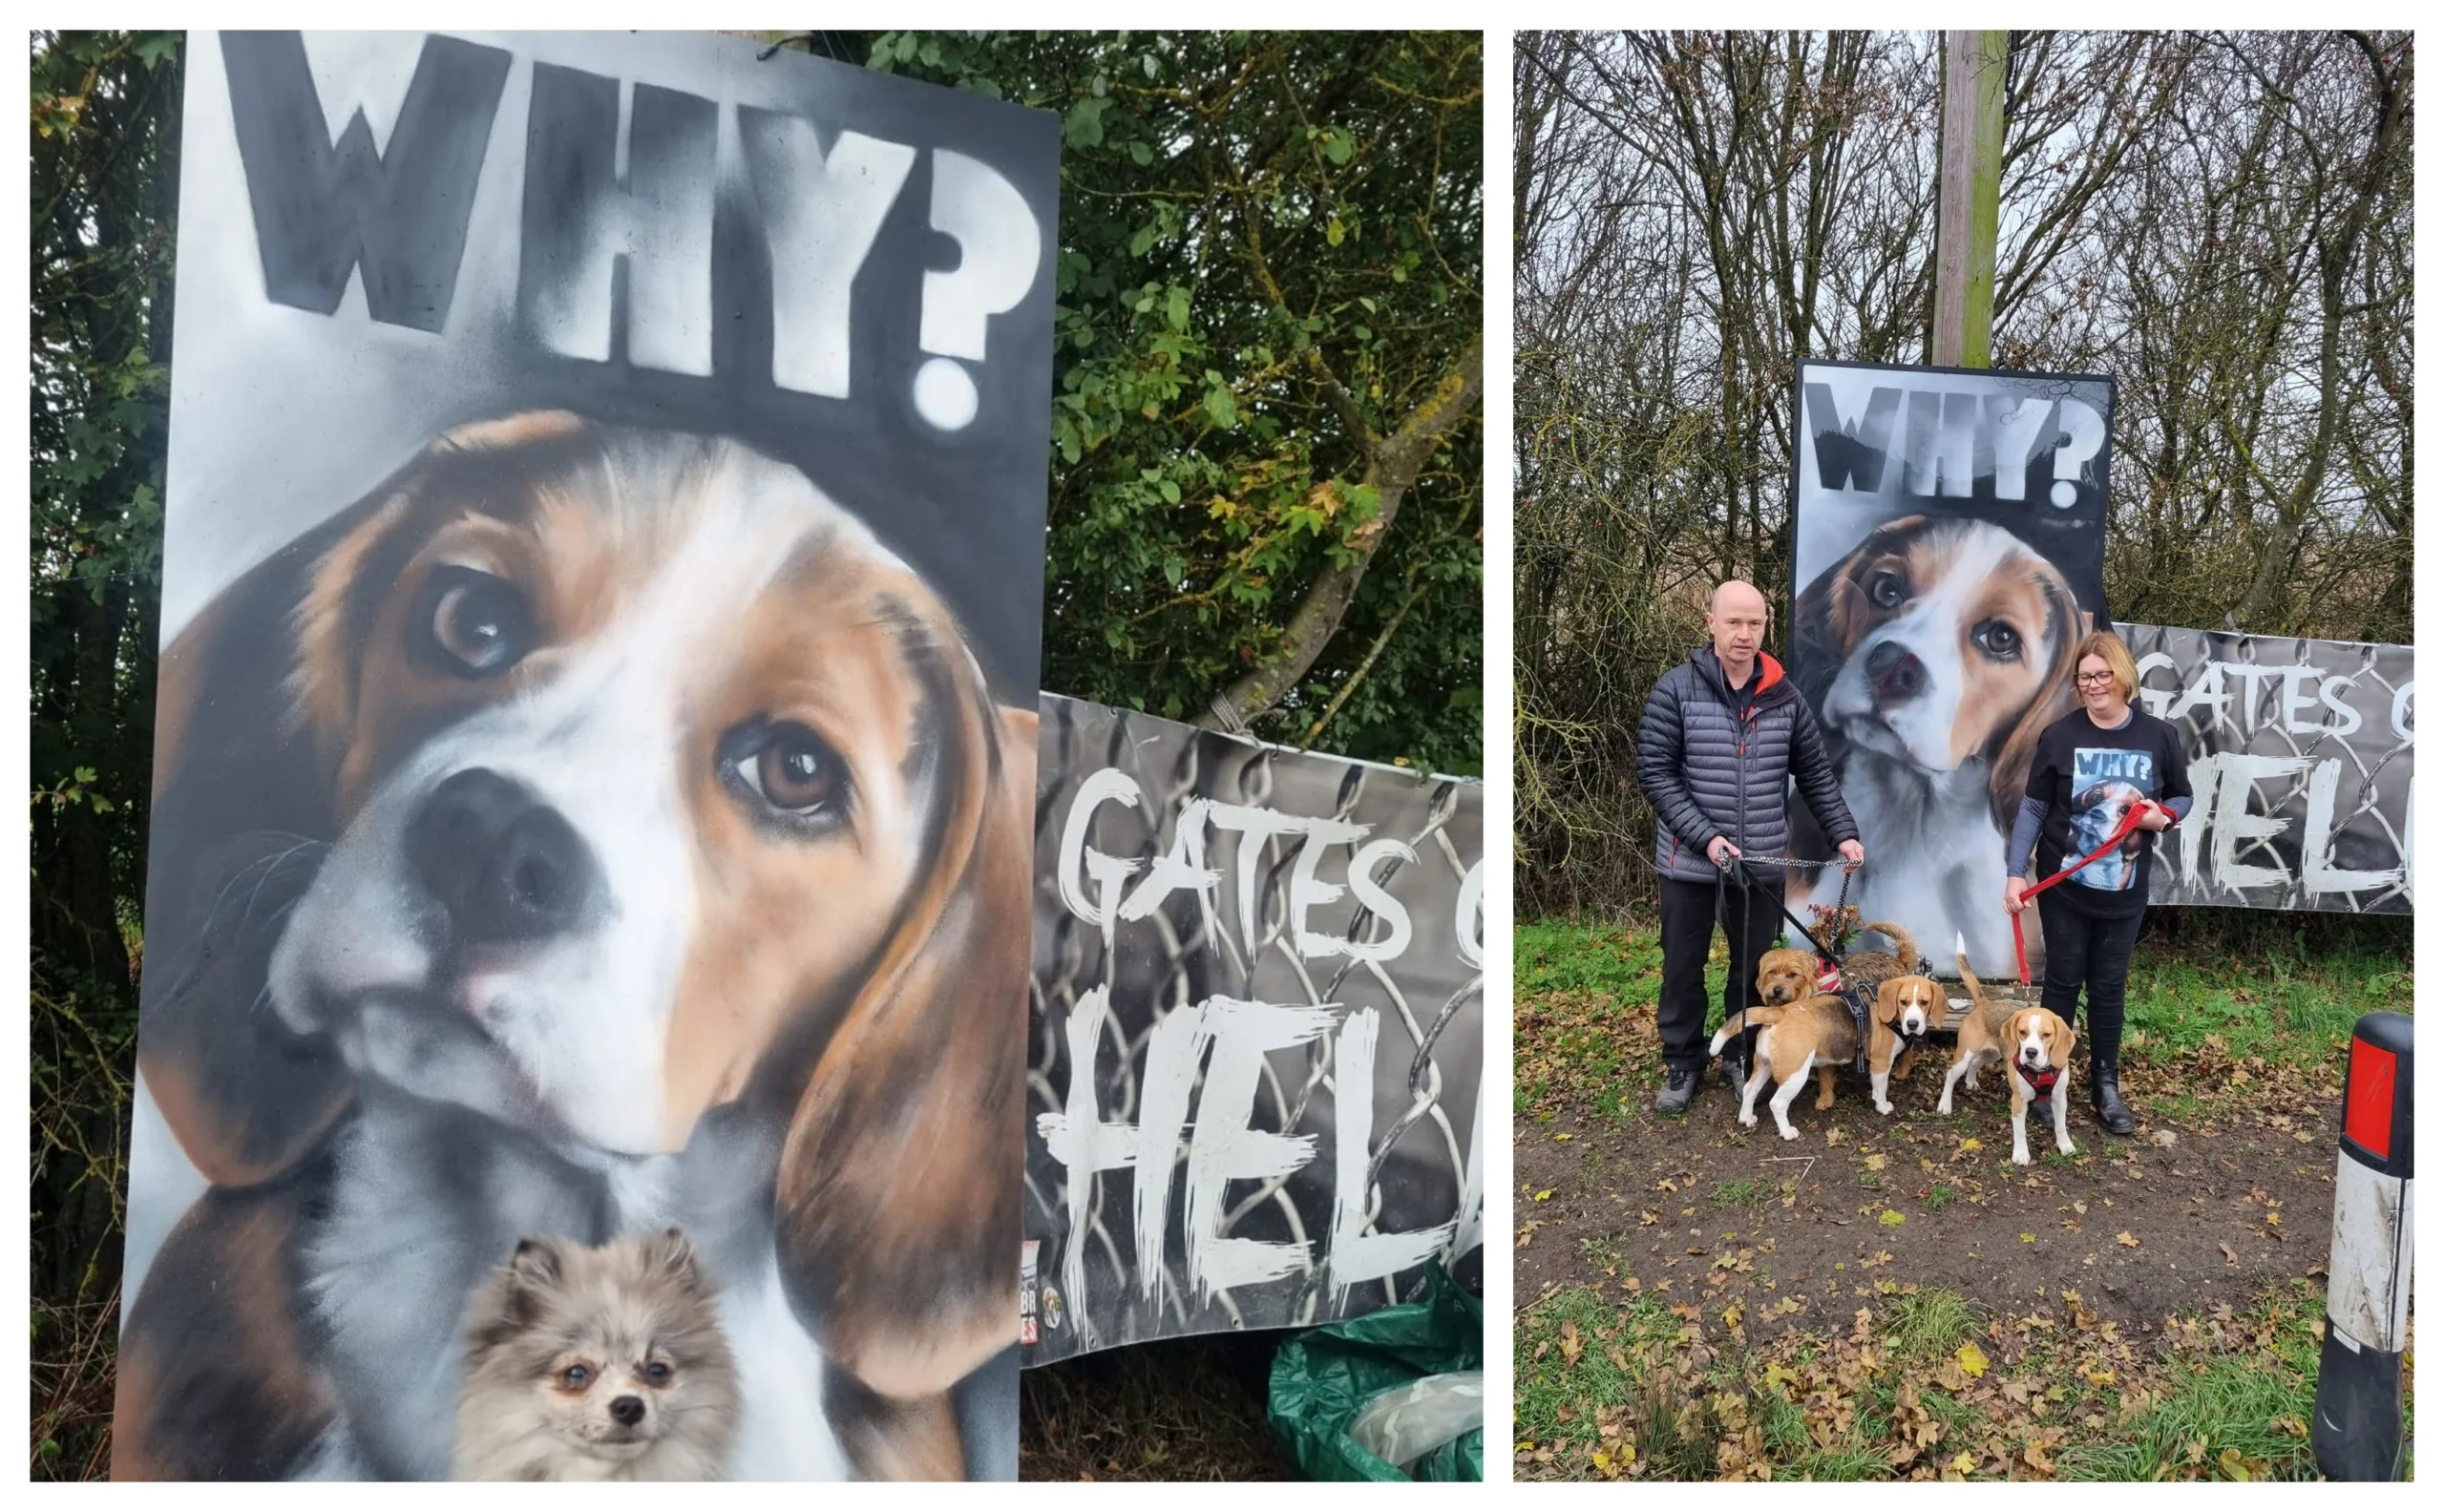 Camp Beagle wishes to close down MBR Acres, a huge beagle breeding factory near Huntingdon, which supplies about 2,000 puppies a year to toxicology testing laboratories across the UK PHOTO: Camp Beagle